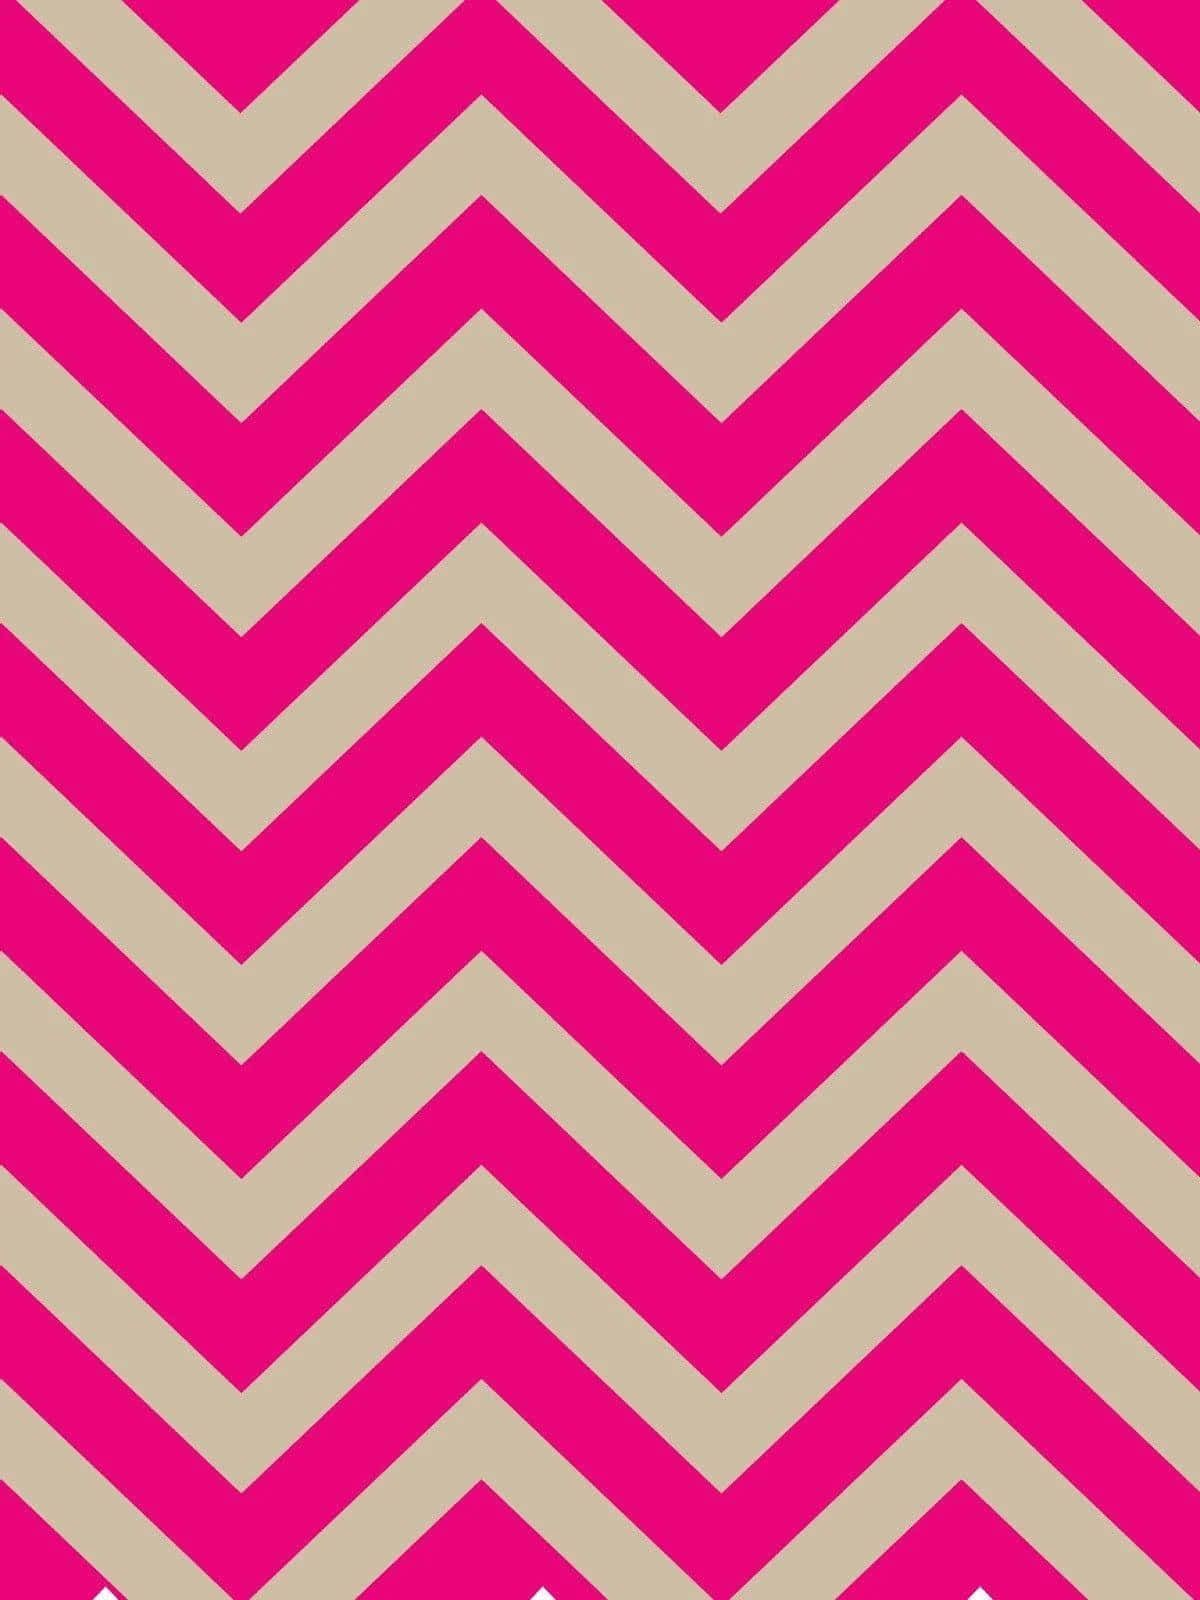 Brighten up your day with a neon pink background